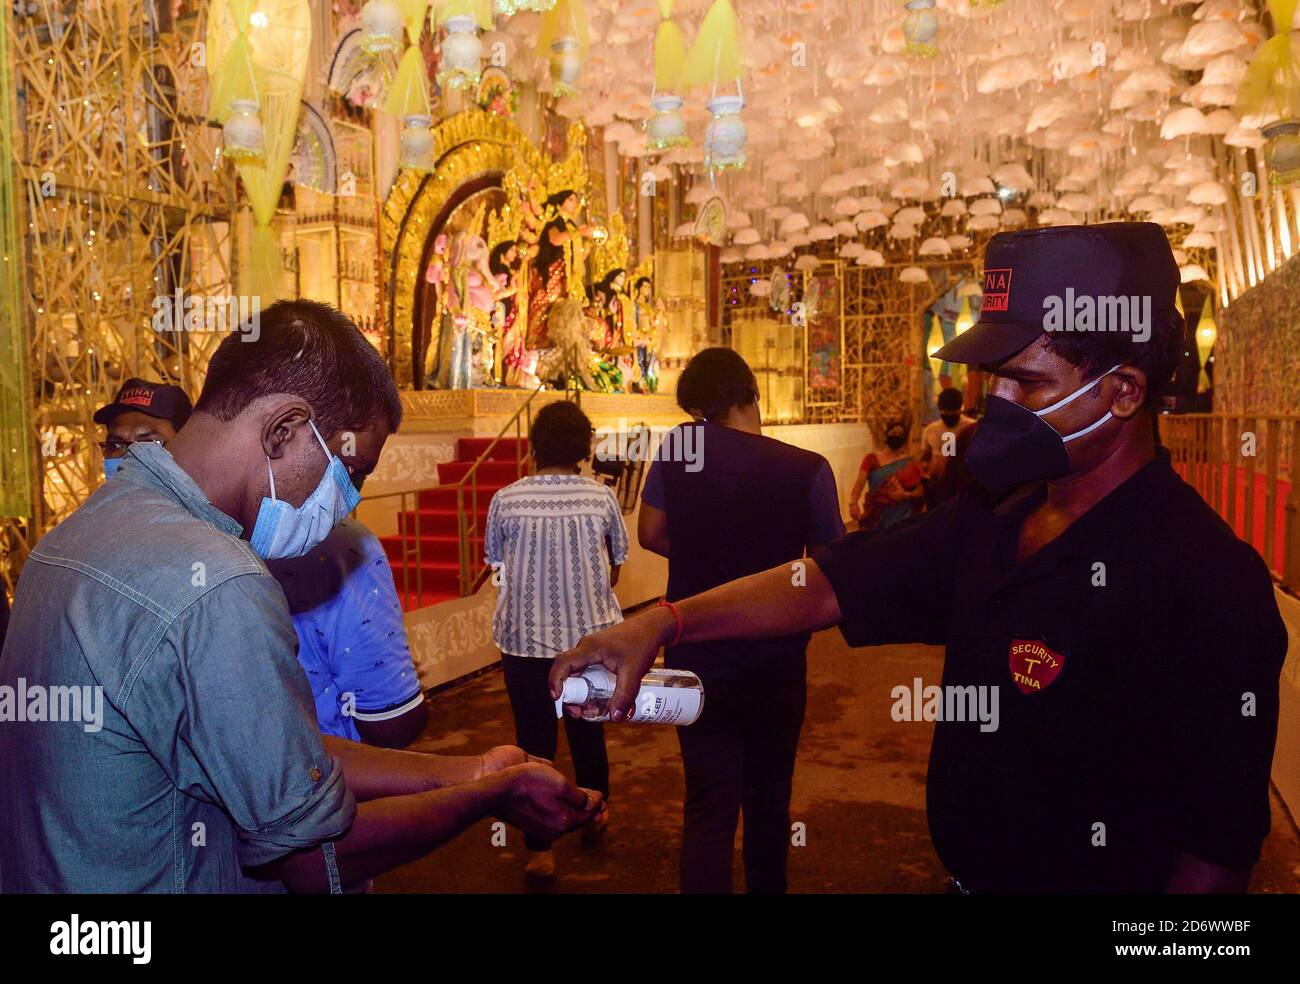 A security guard wearing a facemask sanitizes visitors hands at the entrance of Puja Pandal to stop the spread of  coronavirus. Kolkata High Court ordered this evening that all puja pandals will be considered as No entry and containment zones. Only a selective number of Puja committee members will be allowed inside however with 5-meter distance from small pandals and 10-meters from big pandal barricade to control the huge number of people. Stock Photo